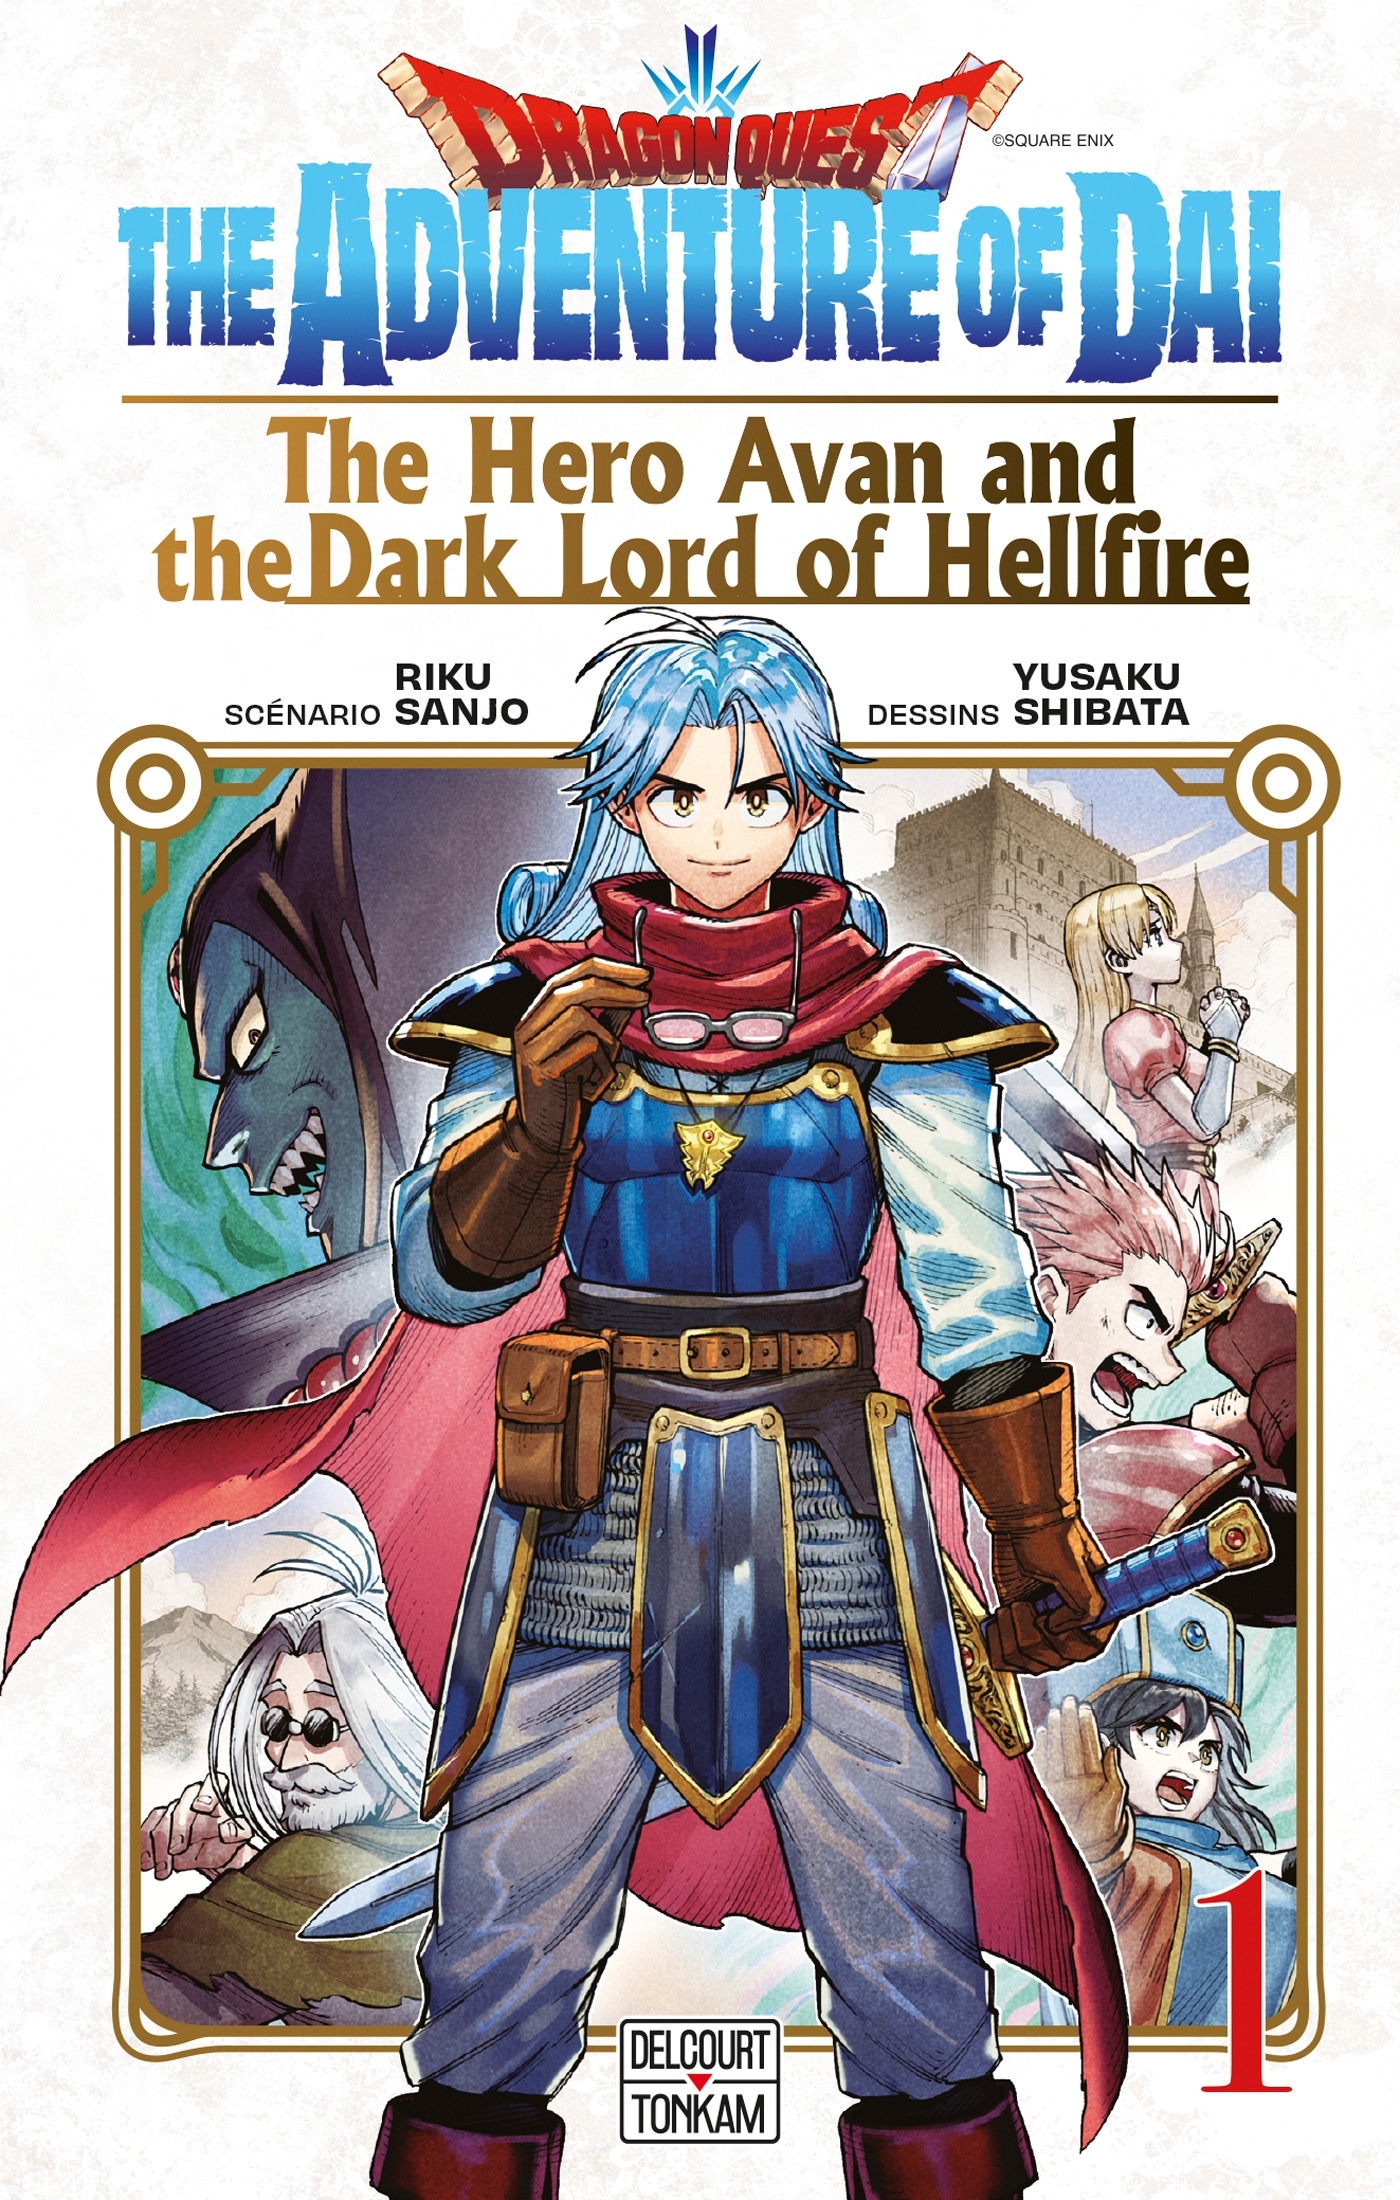 Dragon Quest - The Adventure of Daï - The hero Avan and the Dark lord of Hellfire